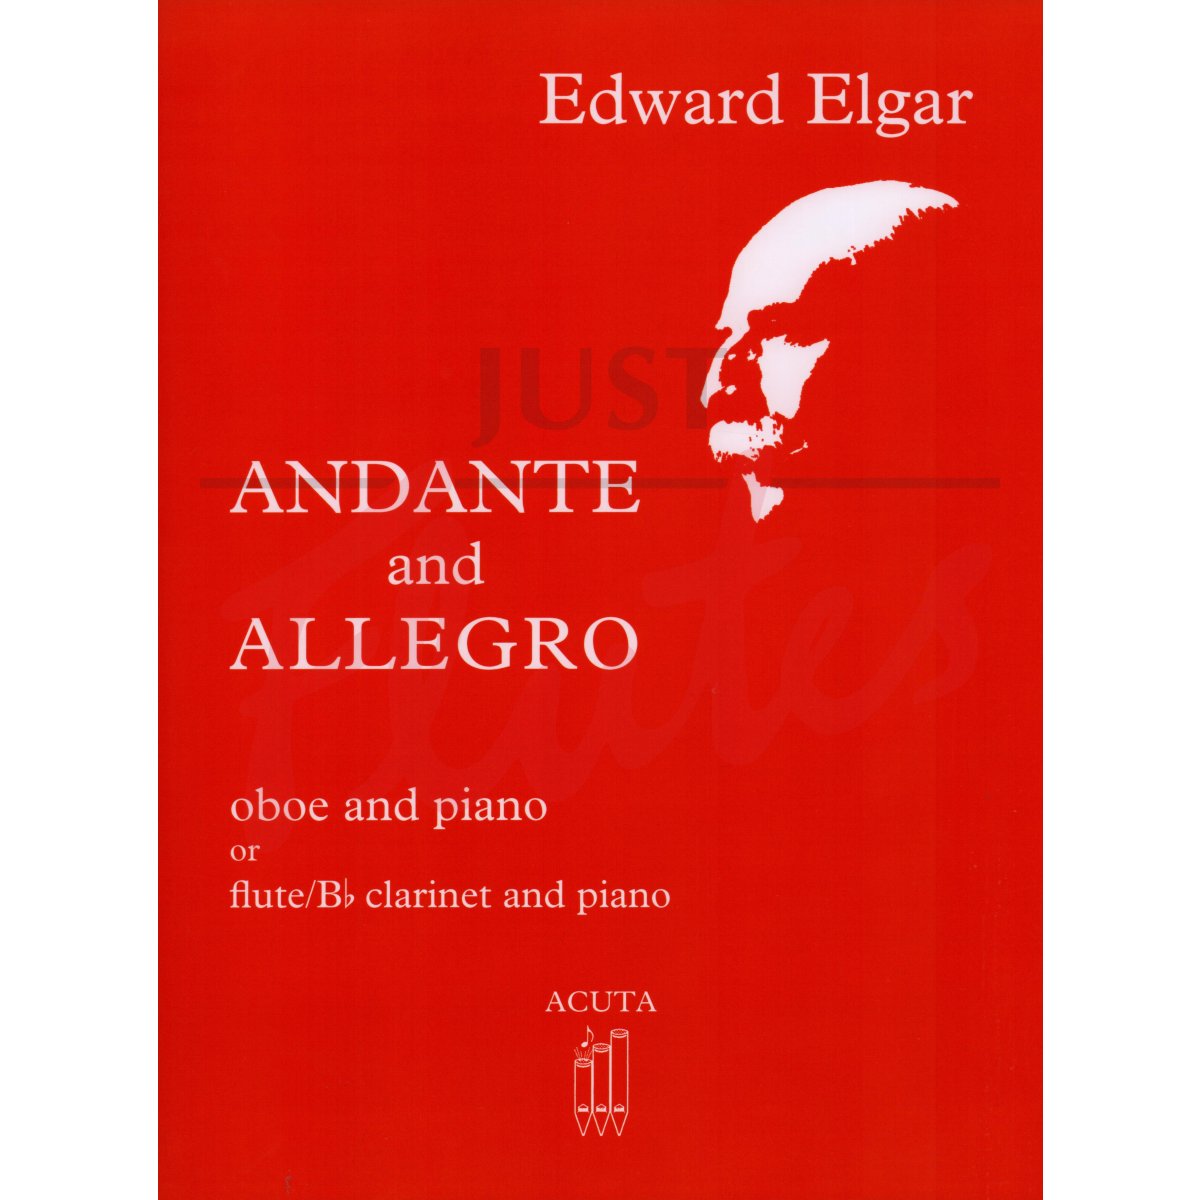 Andante and Allegro for Oboe and Piano